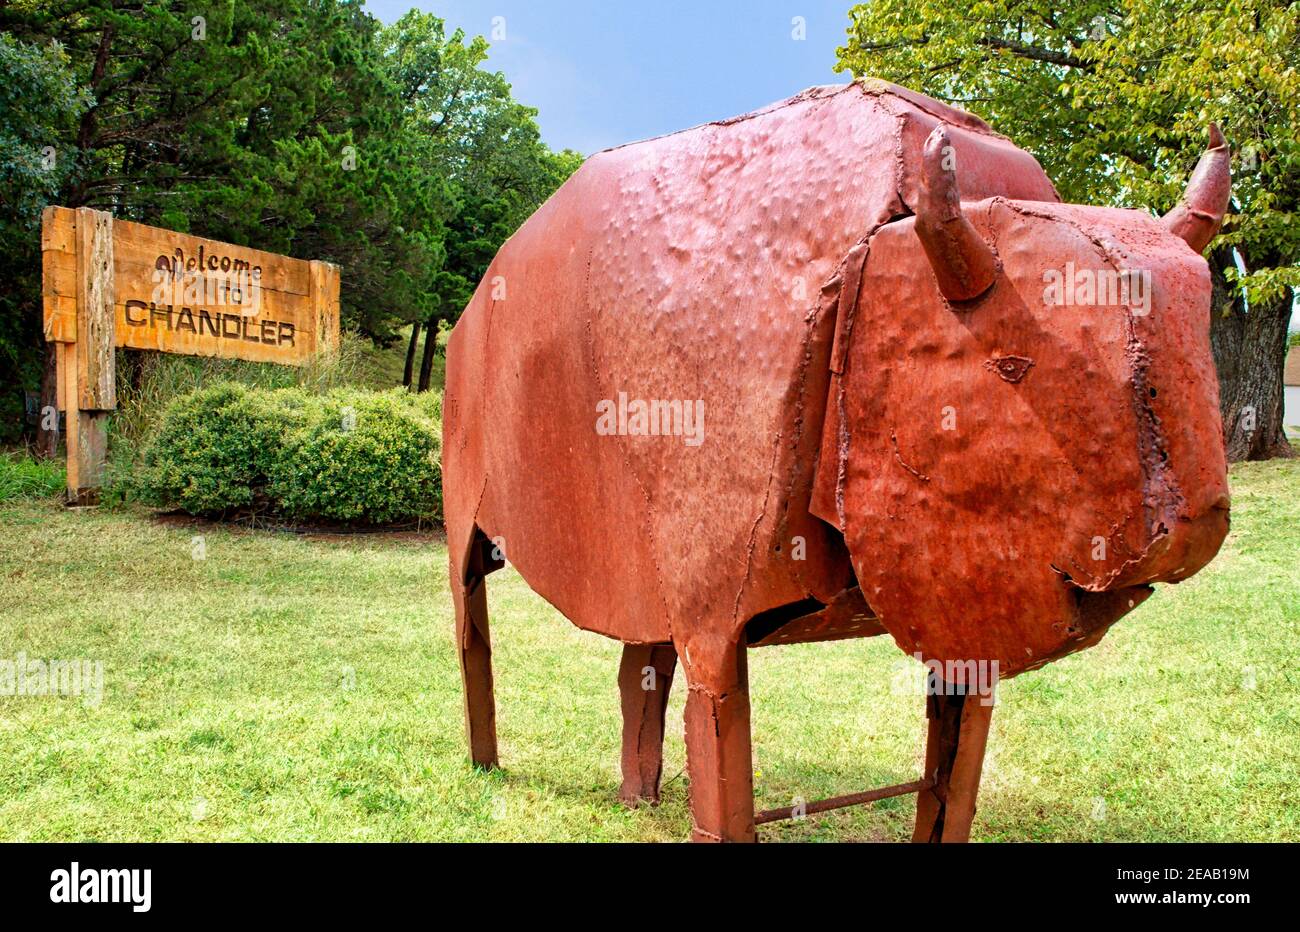 A rustic metal sculpture of a bison stands in front of a welcome sign in Chandler Oklahoma along Route 66. Stock Photo